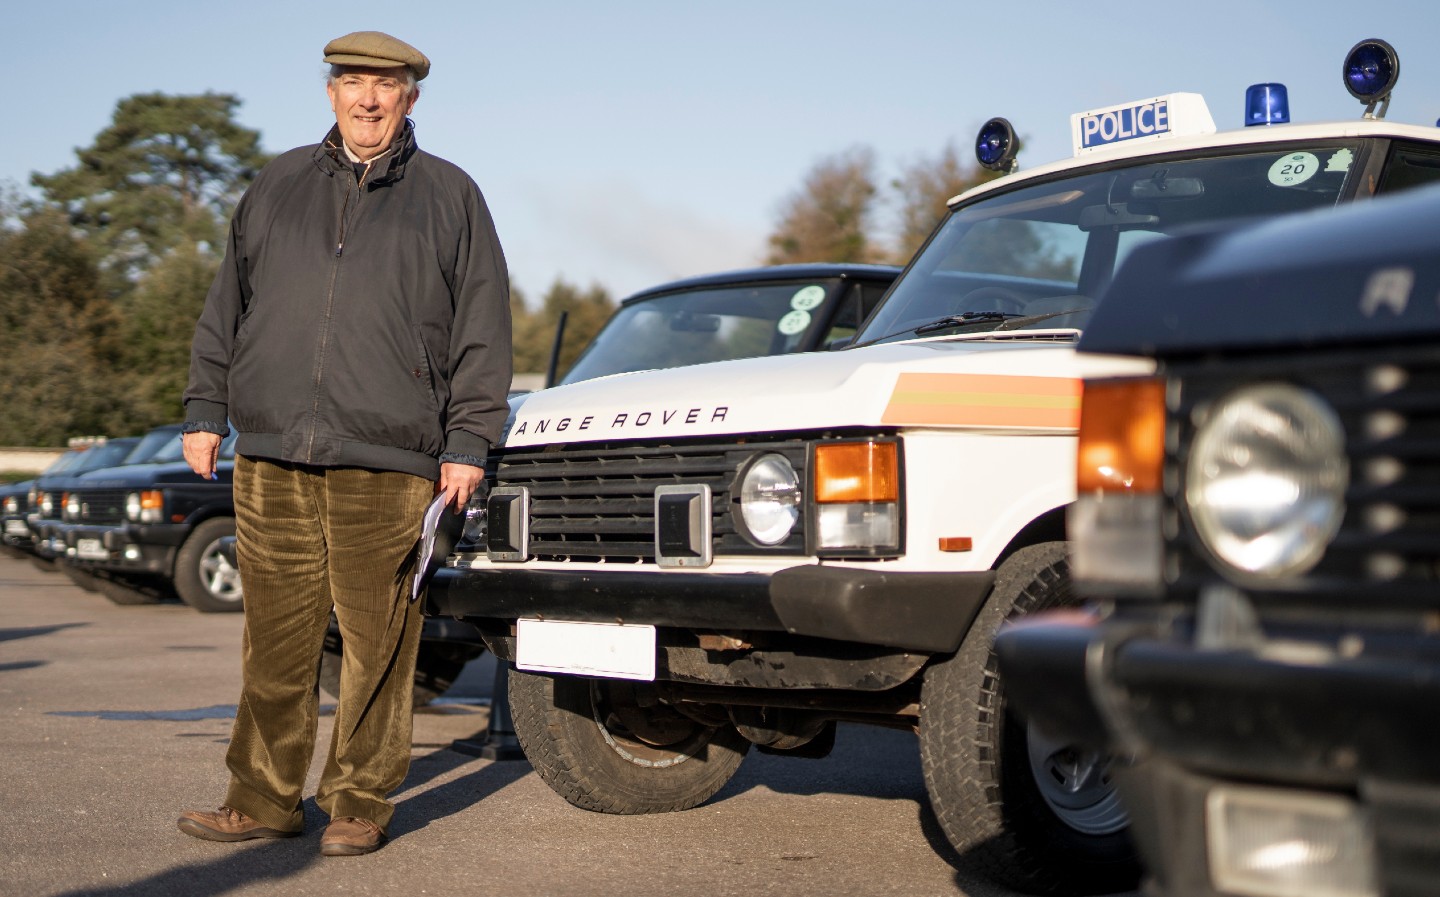 Range Rover fiftieth anniversary: From a Royal Rangie to one bought by a member of Queen, meet the star cars and their owners - Richard beddall - Dunsfold Collection